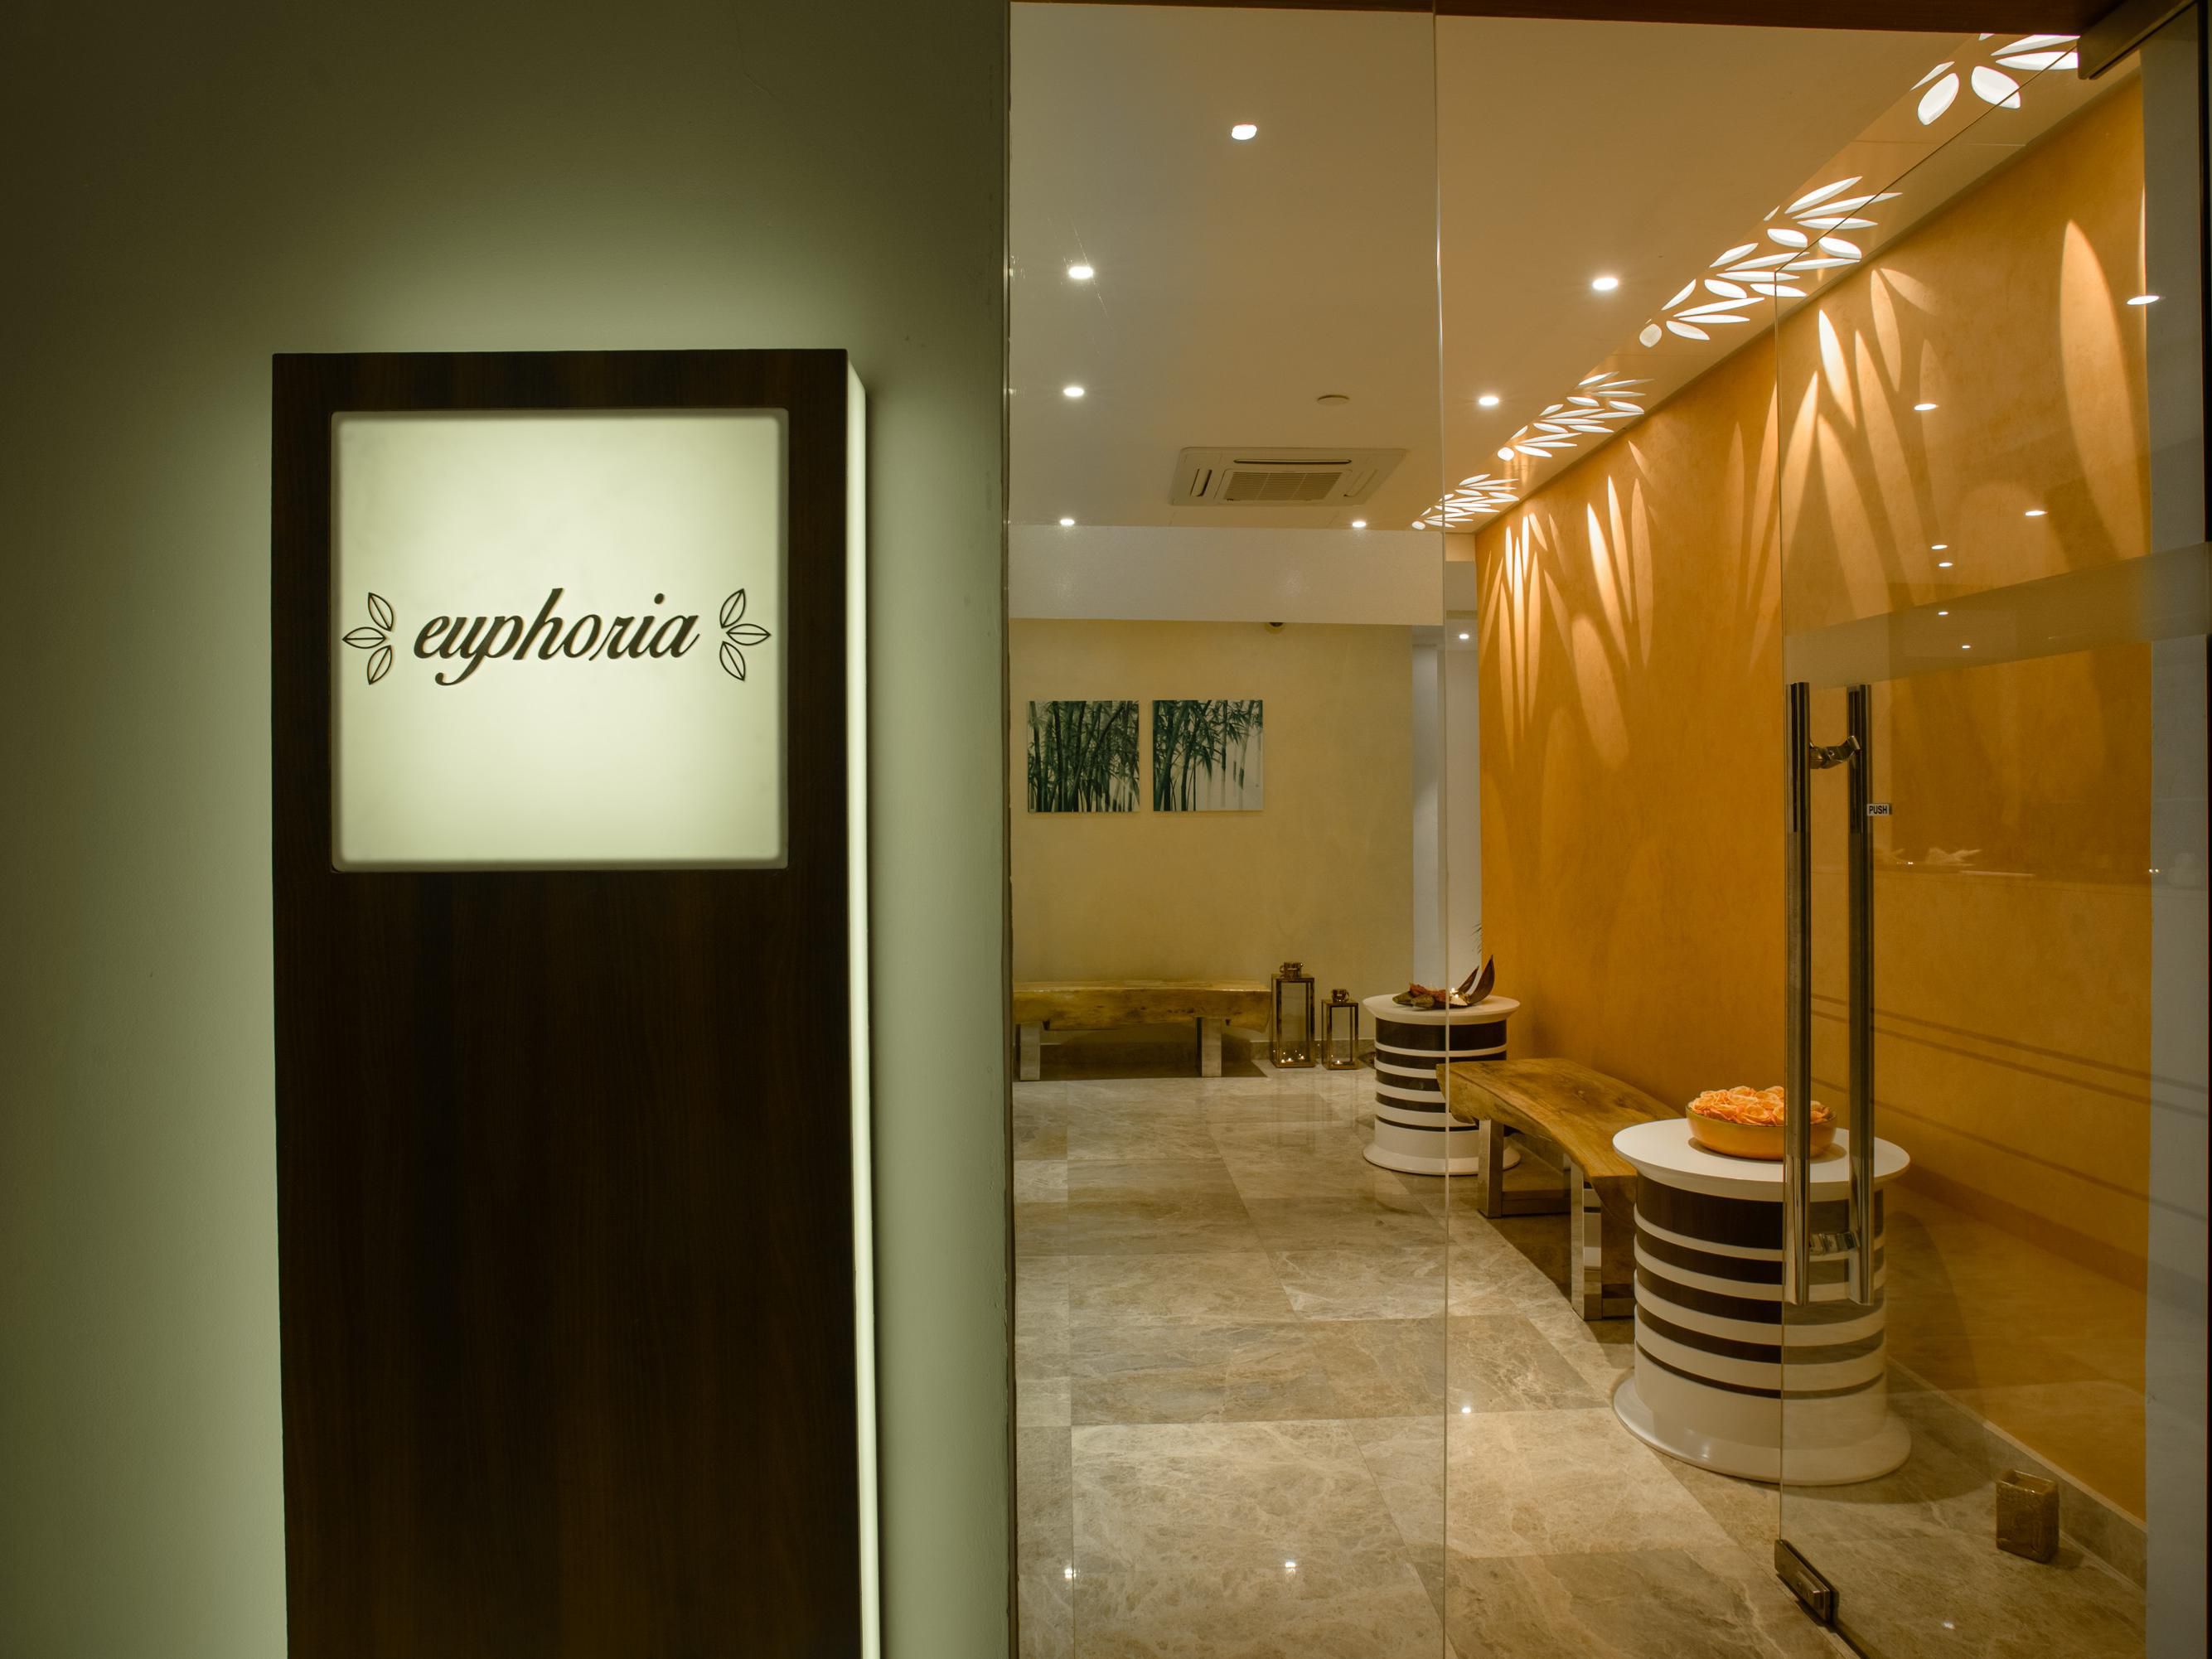 We enable our guests to power up and power down, helping you balance productivity with inspiration and relaxation. 
Massages and facials using organic essential oils and plant extracts are available, accompanied by a relaxing steam or sauna session or soaking in the views from our rooftop swimming pool.
